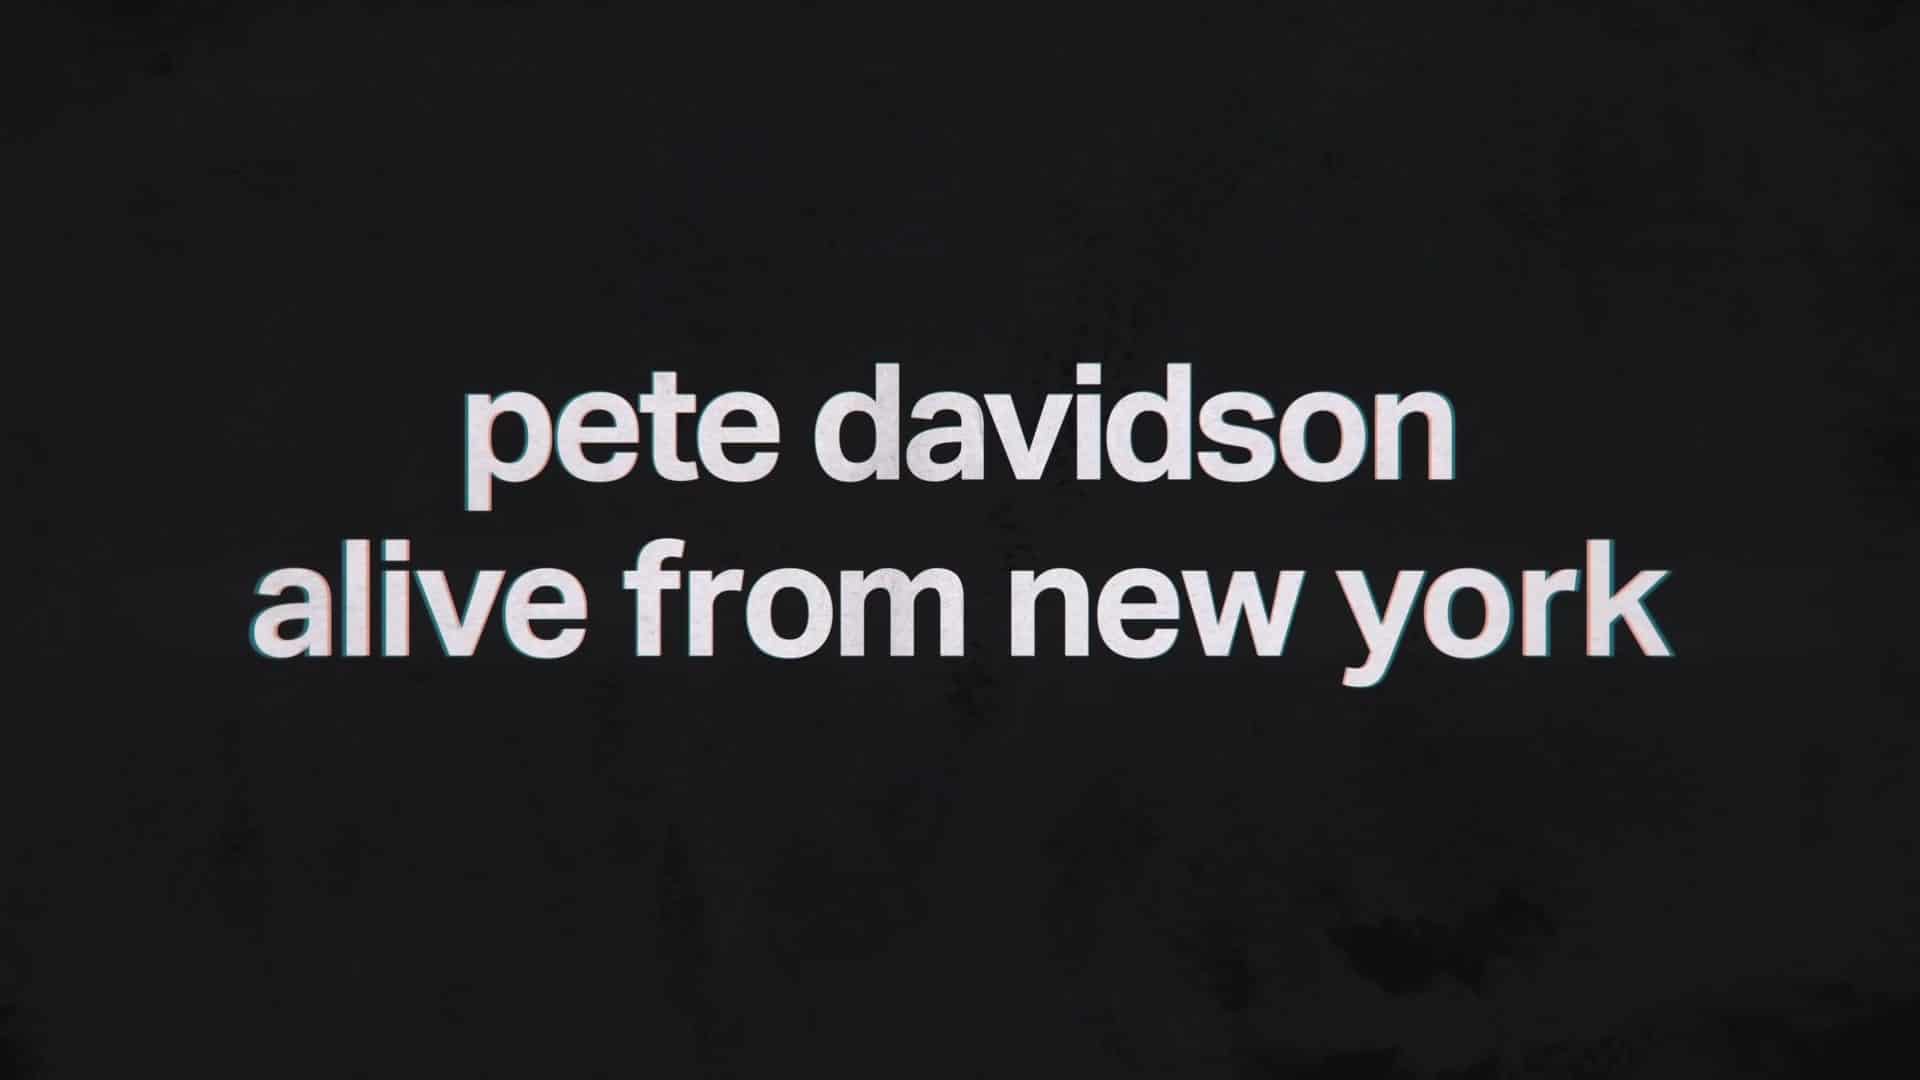 Pete Davidson Alive From New York Netflix Trailer, Netflix Standup Special Trailers, Netflix Comedy Specials, Coming to Netflix in February 2020